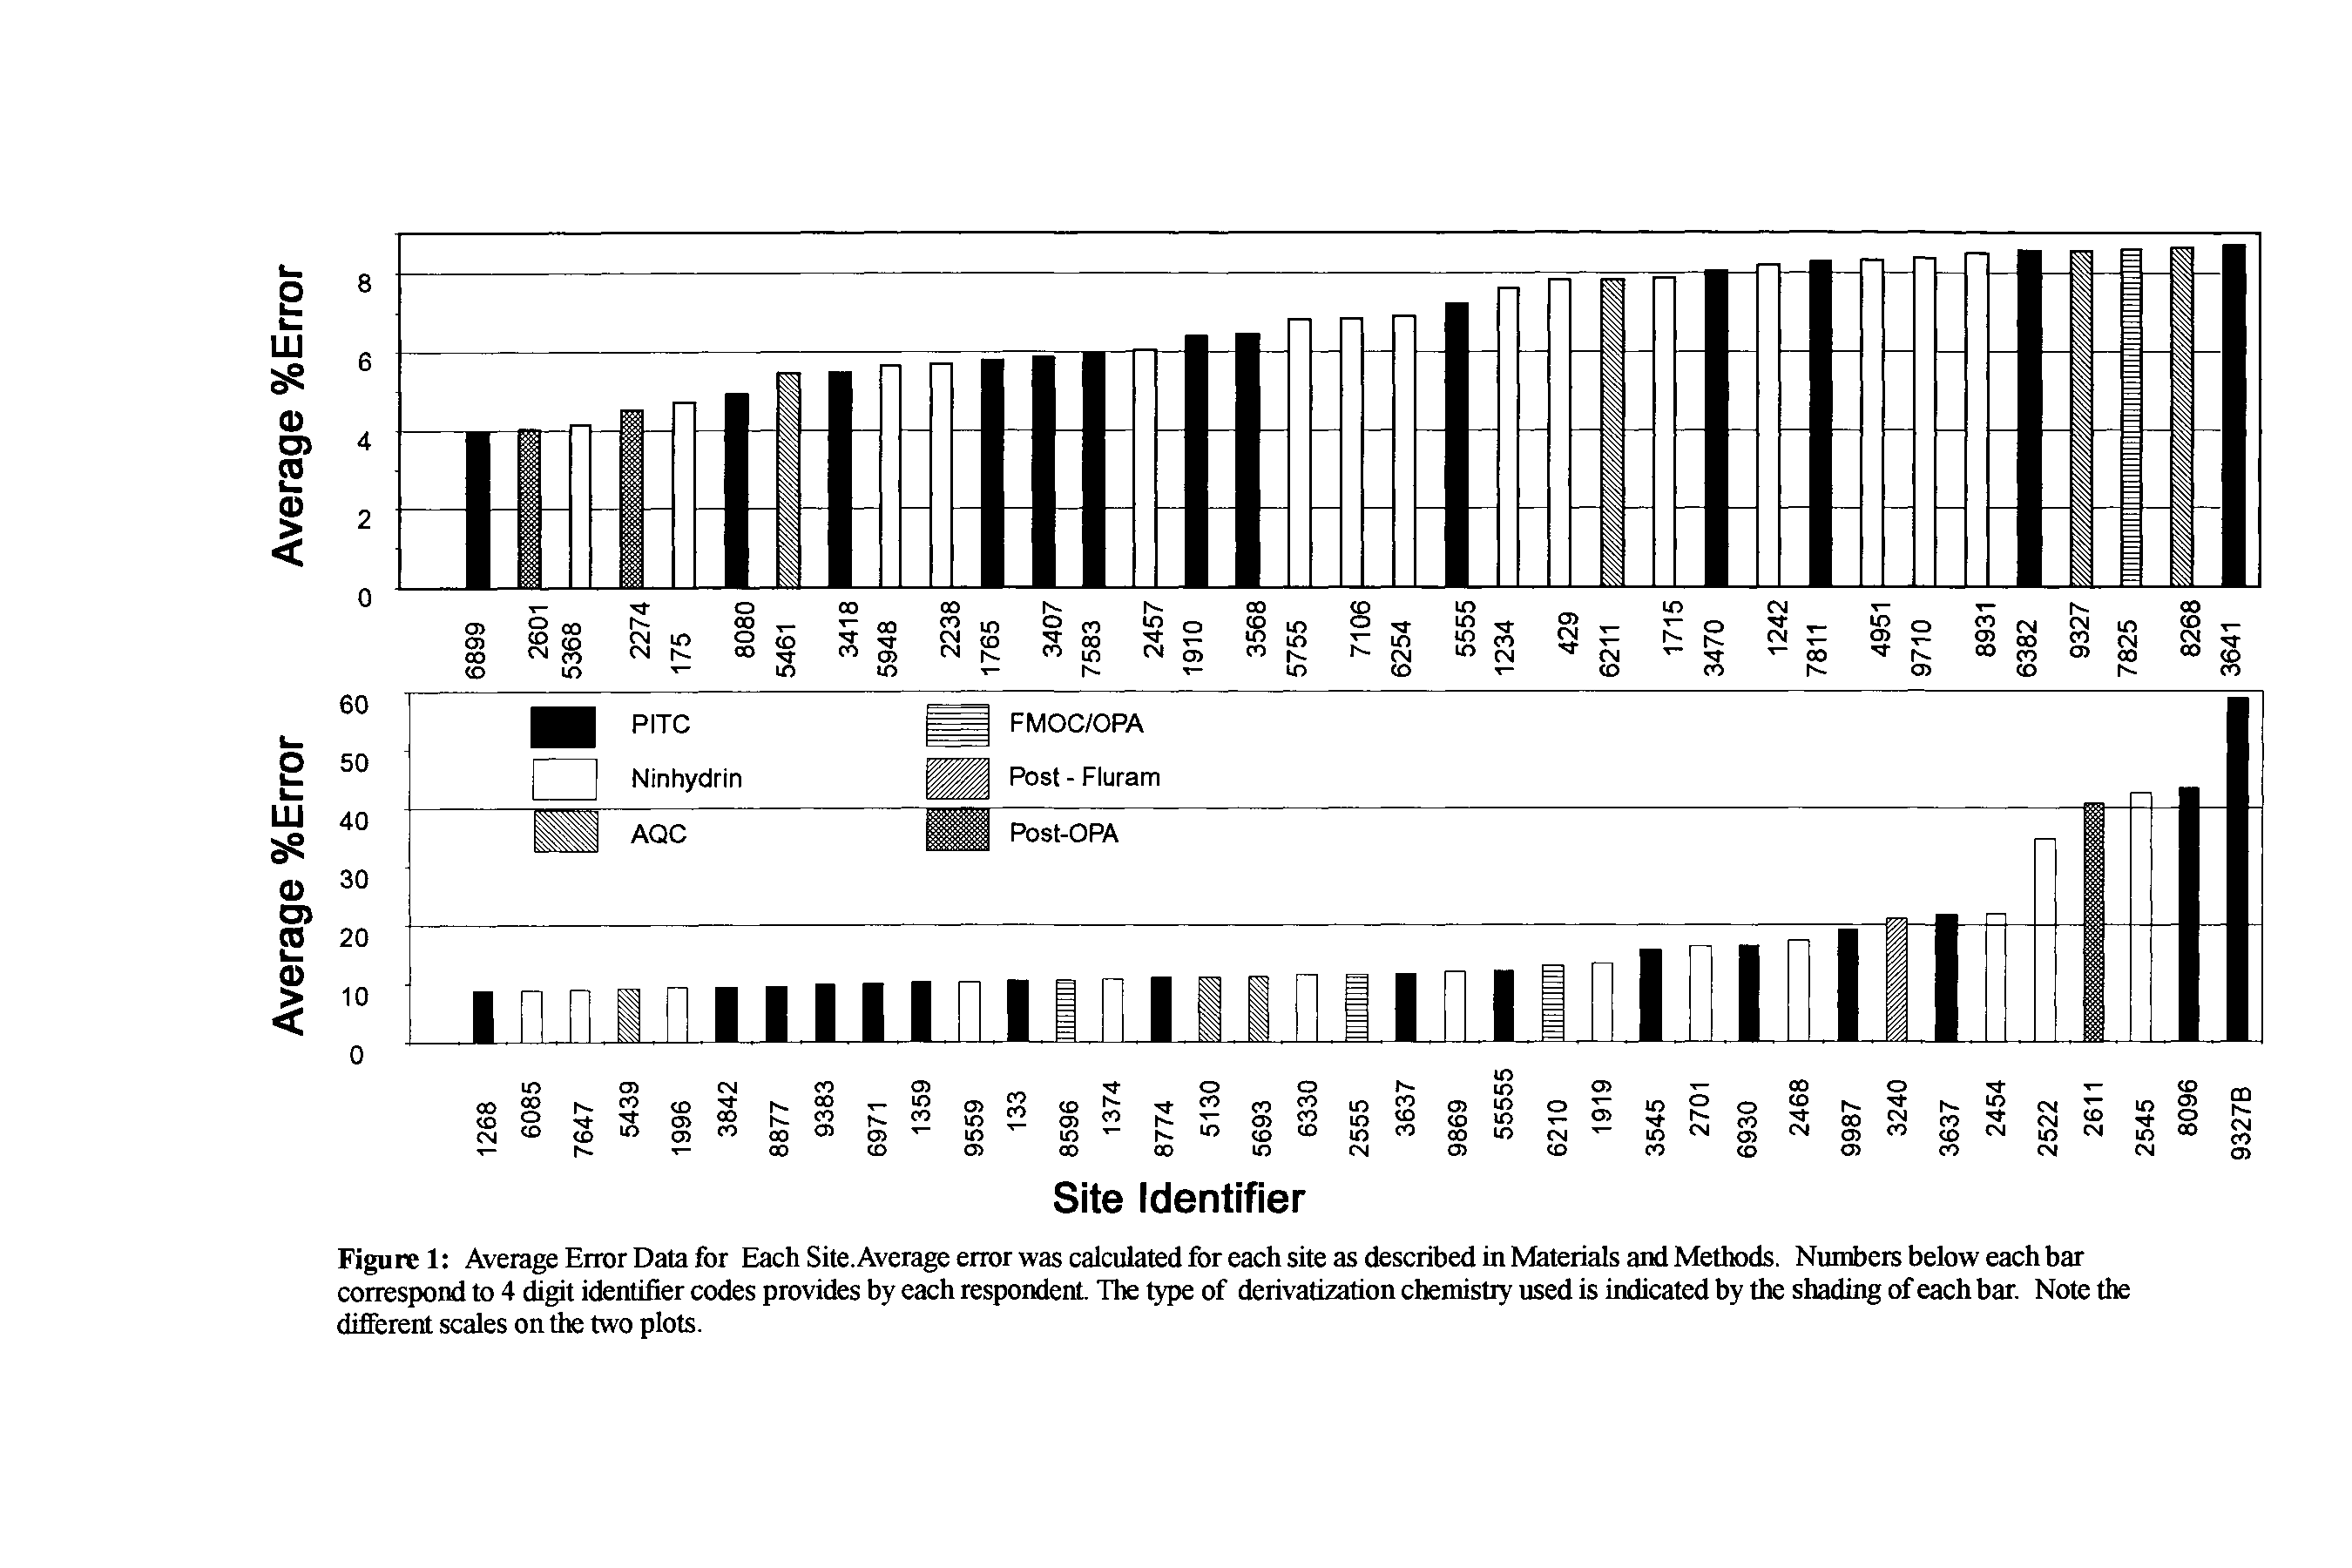 Figure 1 Average Error Data for Each Site. Average error was calculated for each site as described in Materials and Methods. Numbers below each bar correspond to 4 digit identifier codes provides by each respondent. The type of derivatization chemistry used is indicated by the shading of each bar. Note the different scales on the two plots.